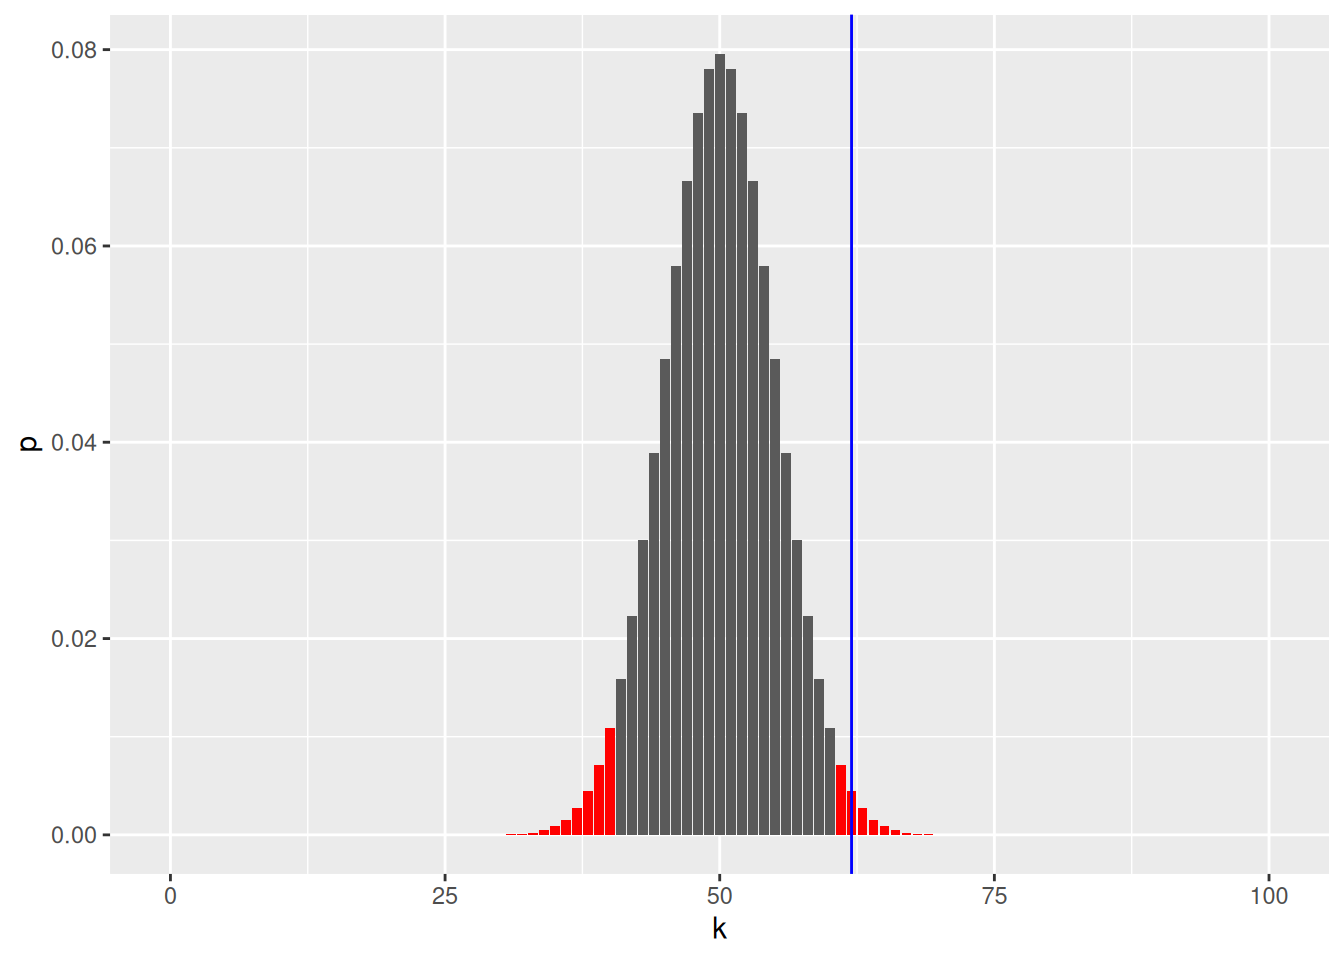 Binomial density of for an unbiased coin to get 0 to 100 heads. The areas in red sum to 0.05.